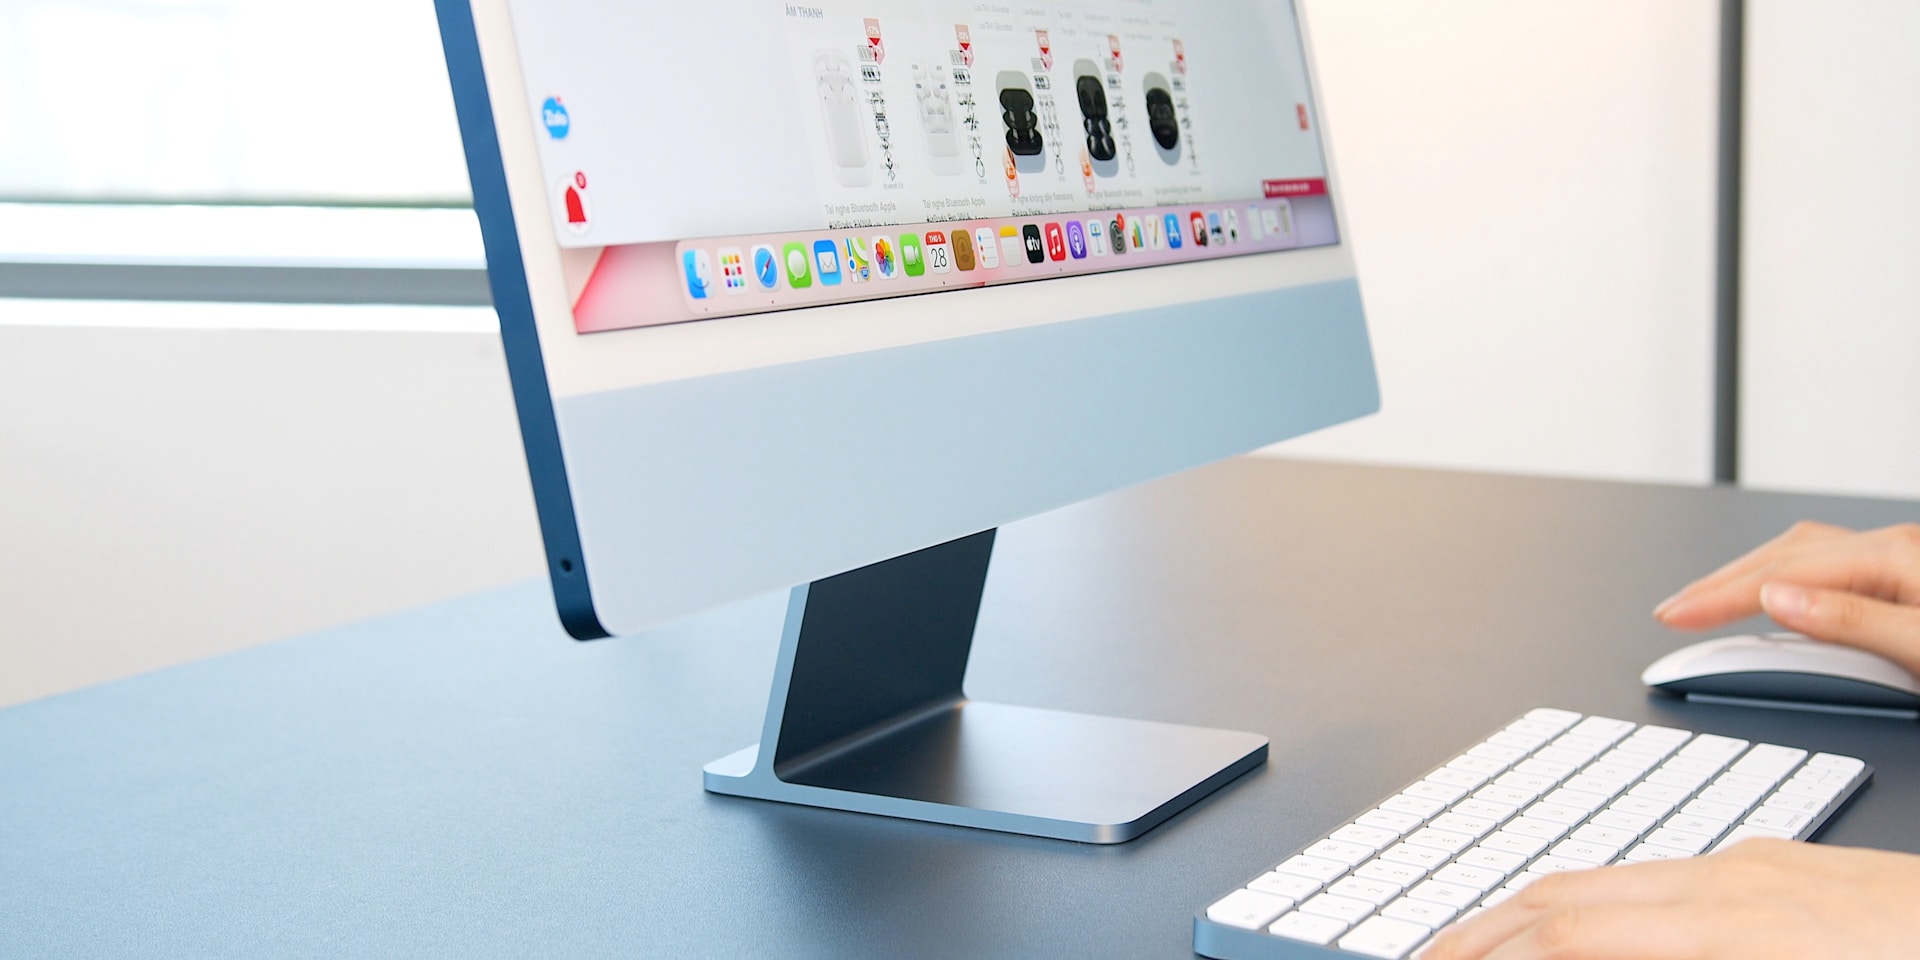 iMac M4 Rumors: Features, Design, and Release Date